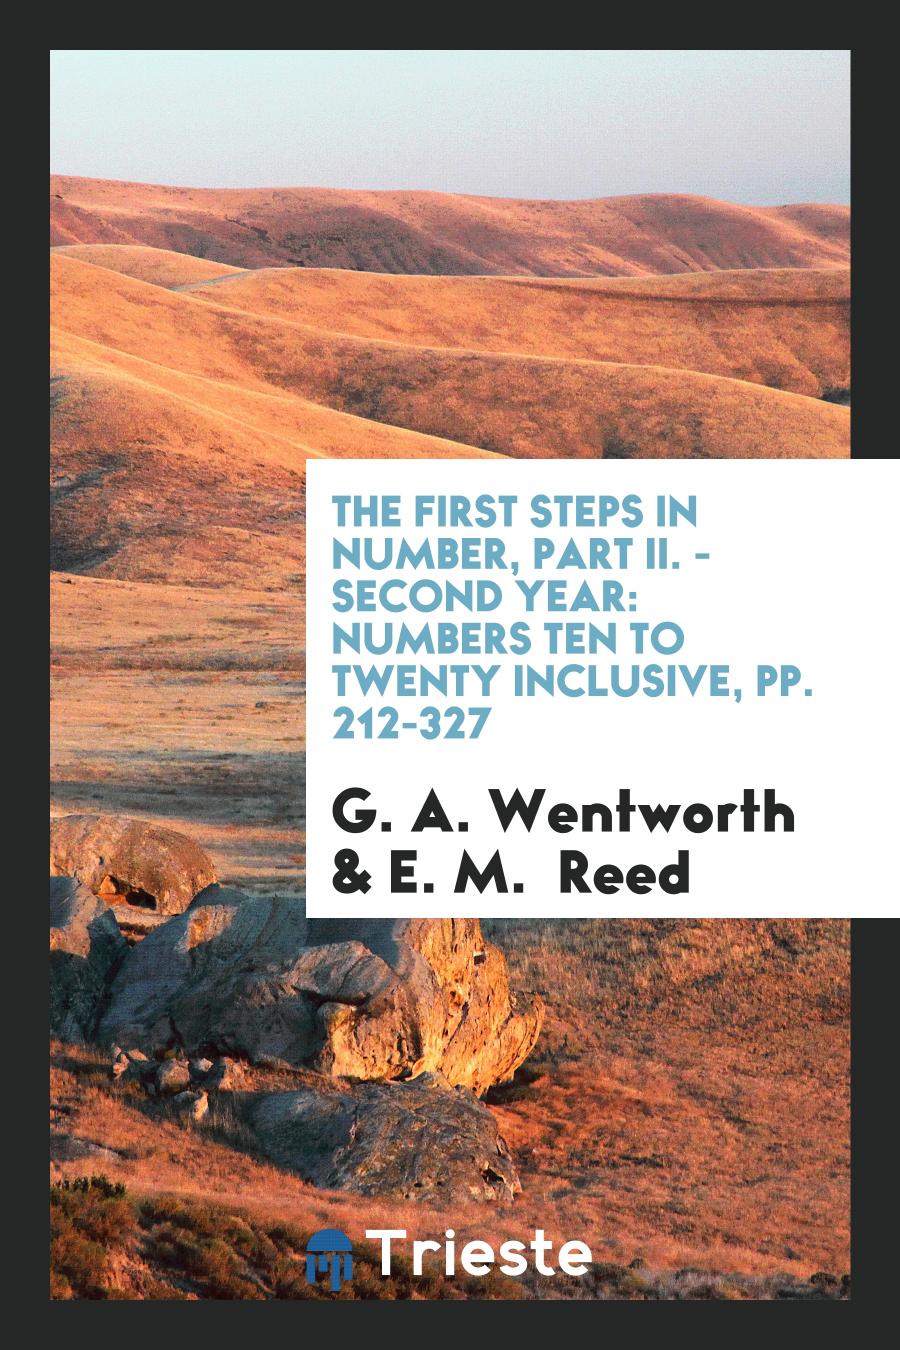 The First Steps in Number, Part II. - Second Year: Numbers Ten to Twenty Inclusive, pp. 212-327